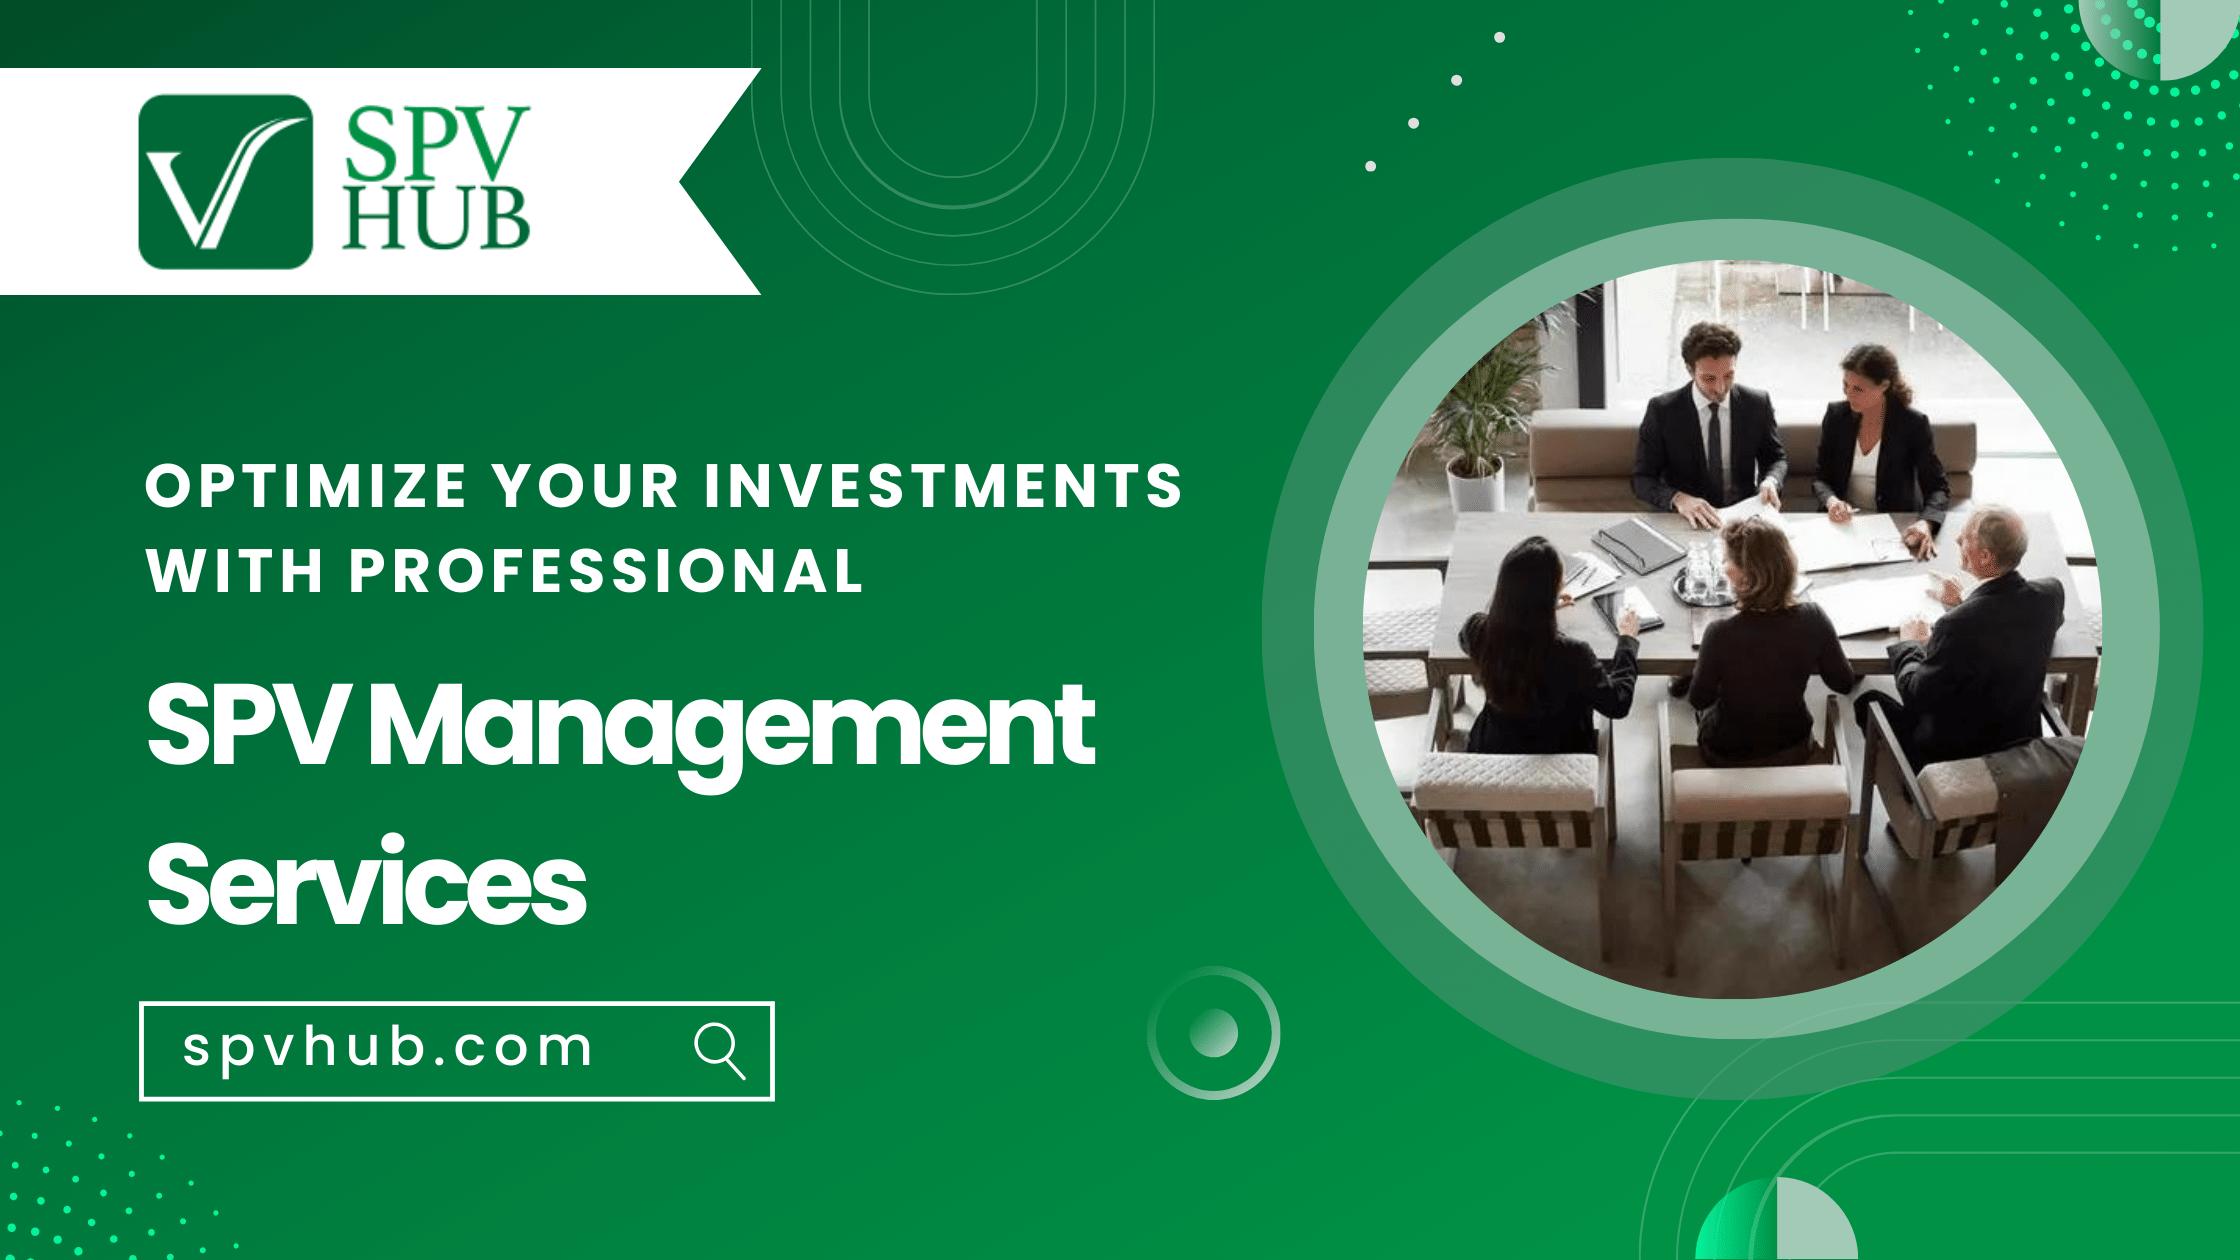 Optimize Your Investments with Professional SPV Management Services